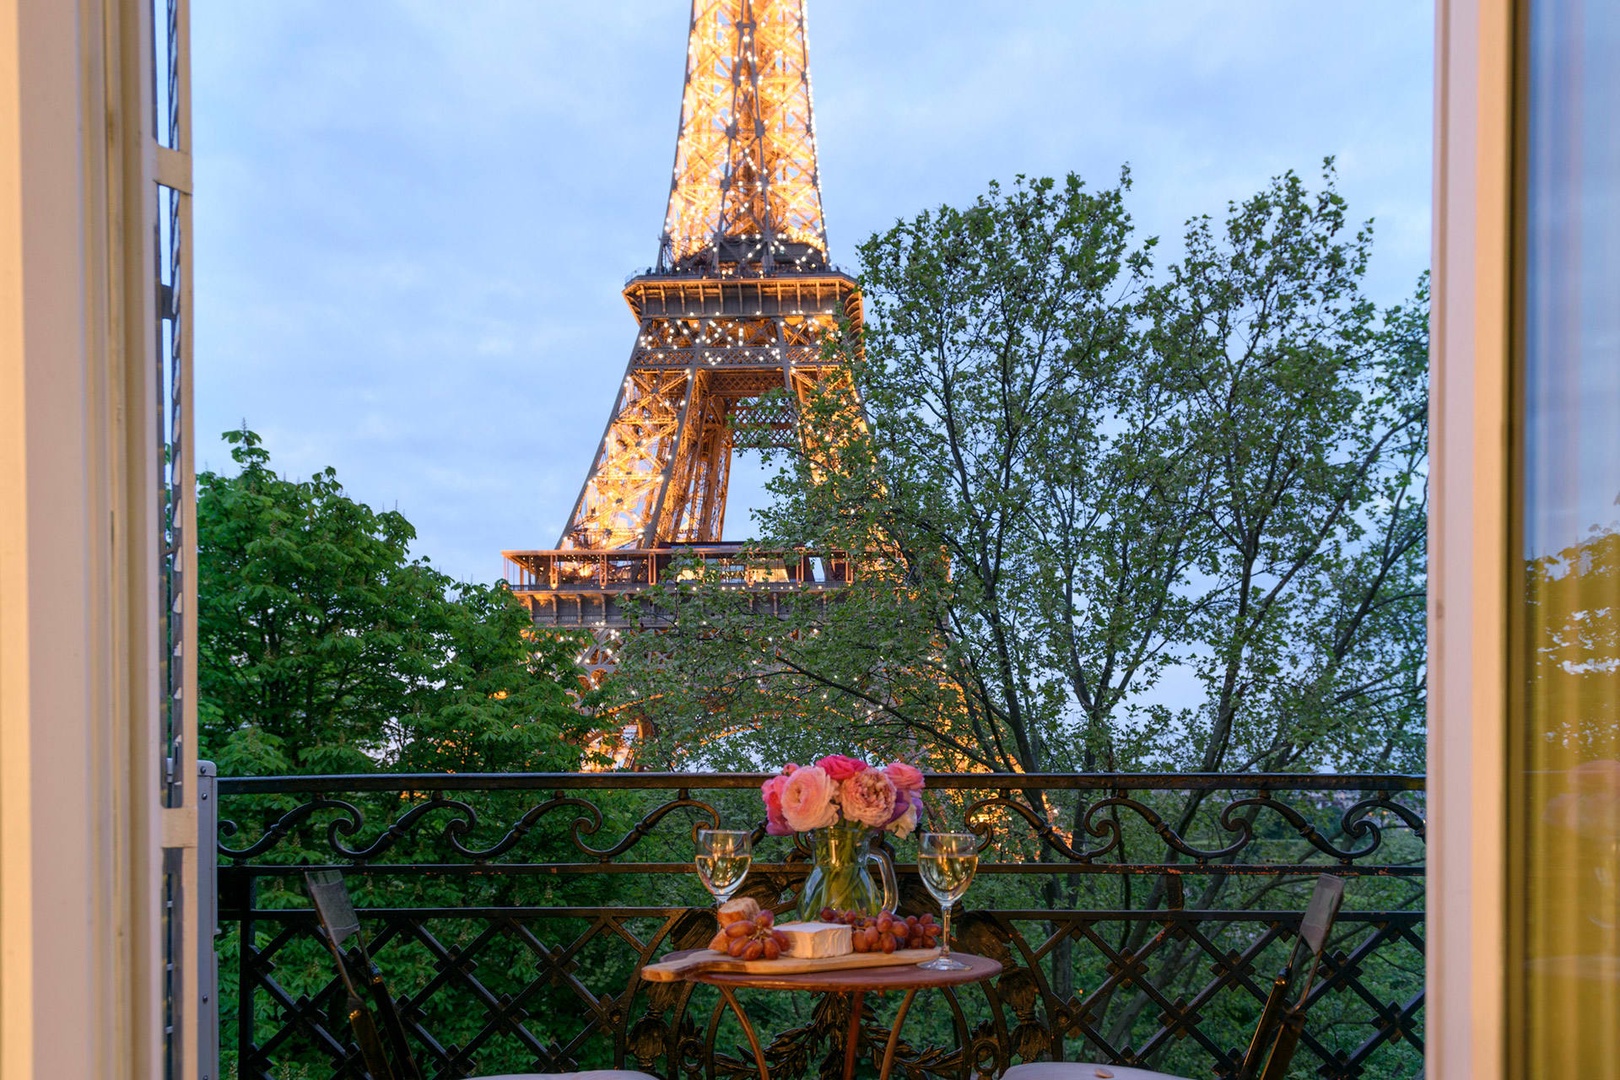 8 Sublime Hotels in Paris With an Eiffel Tower View - Savored Journeys